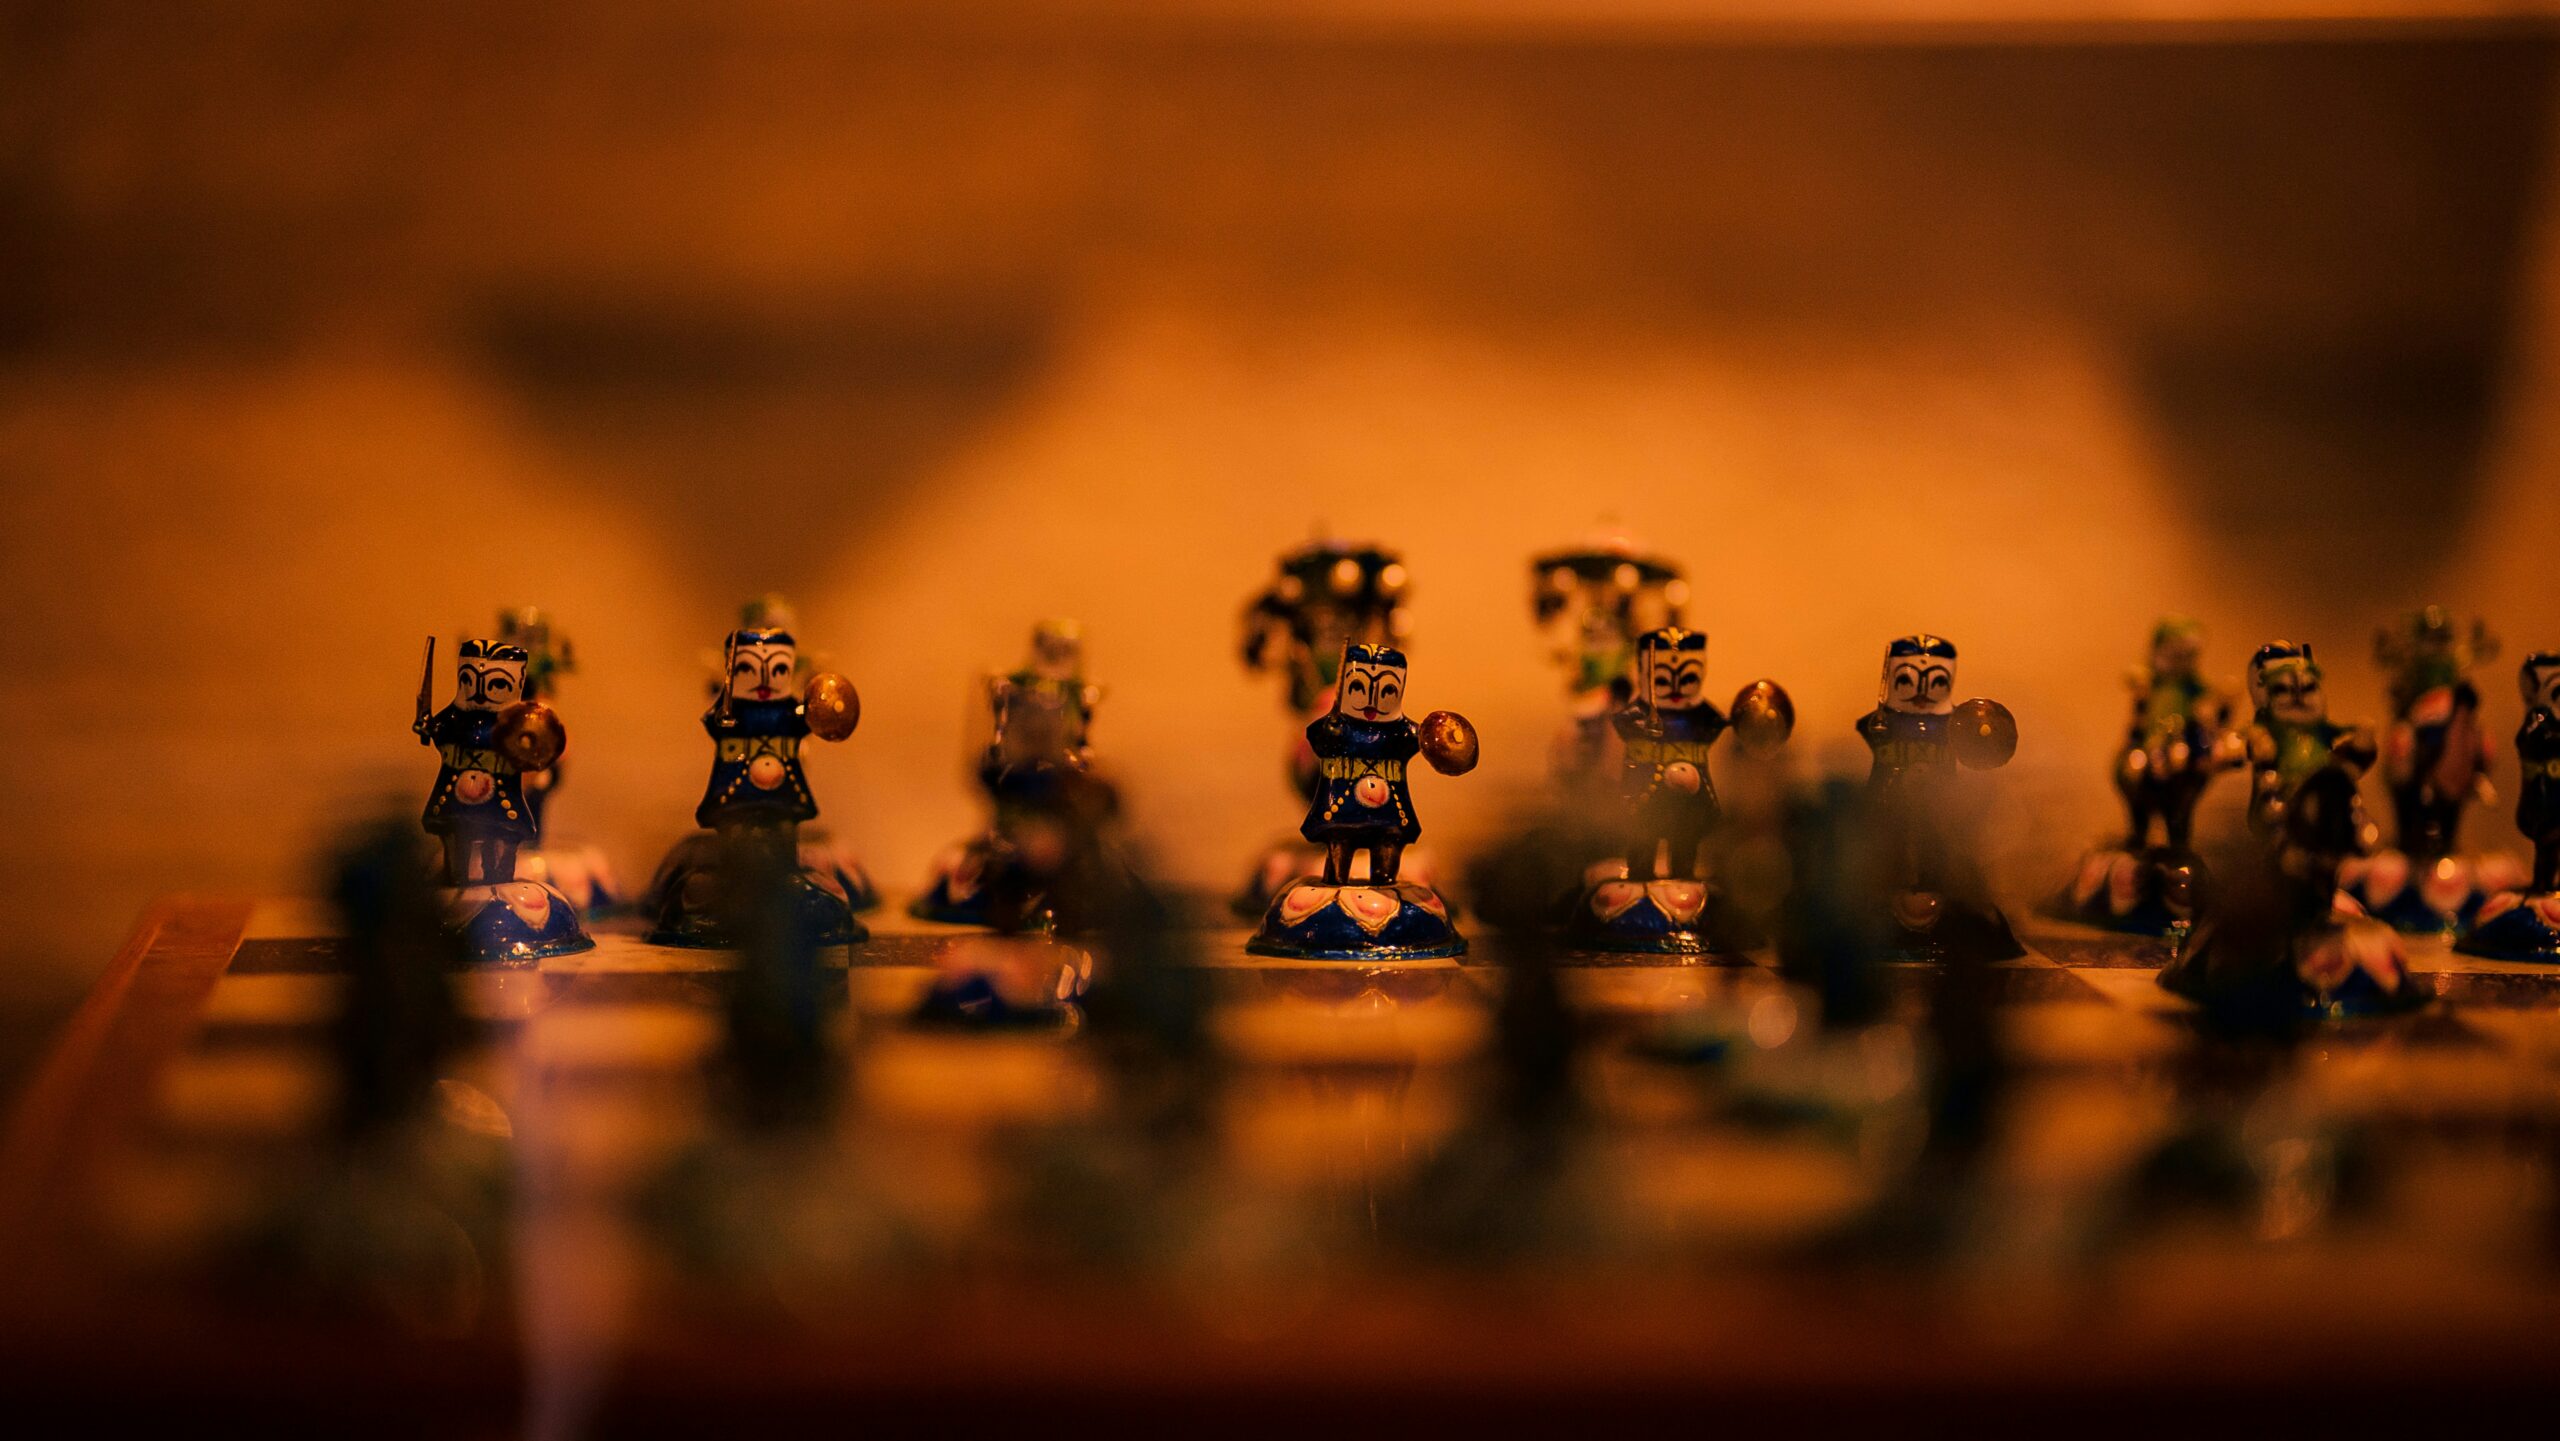 IQ, a group of toy figurines sitting on top of a wooden table